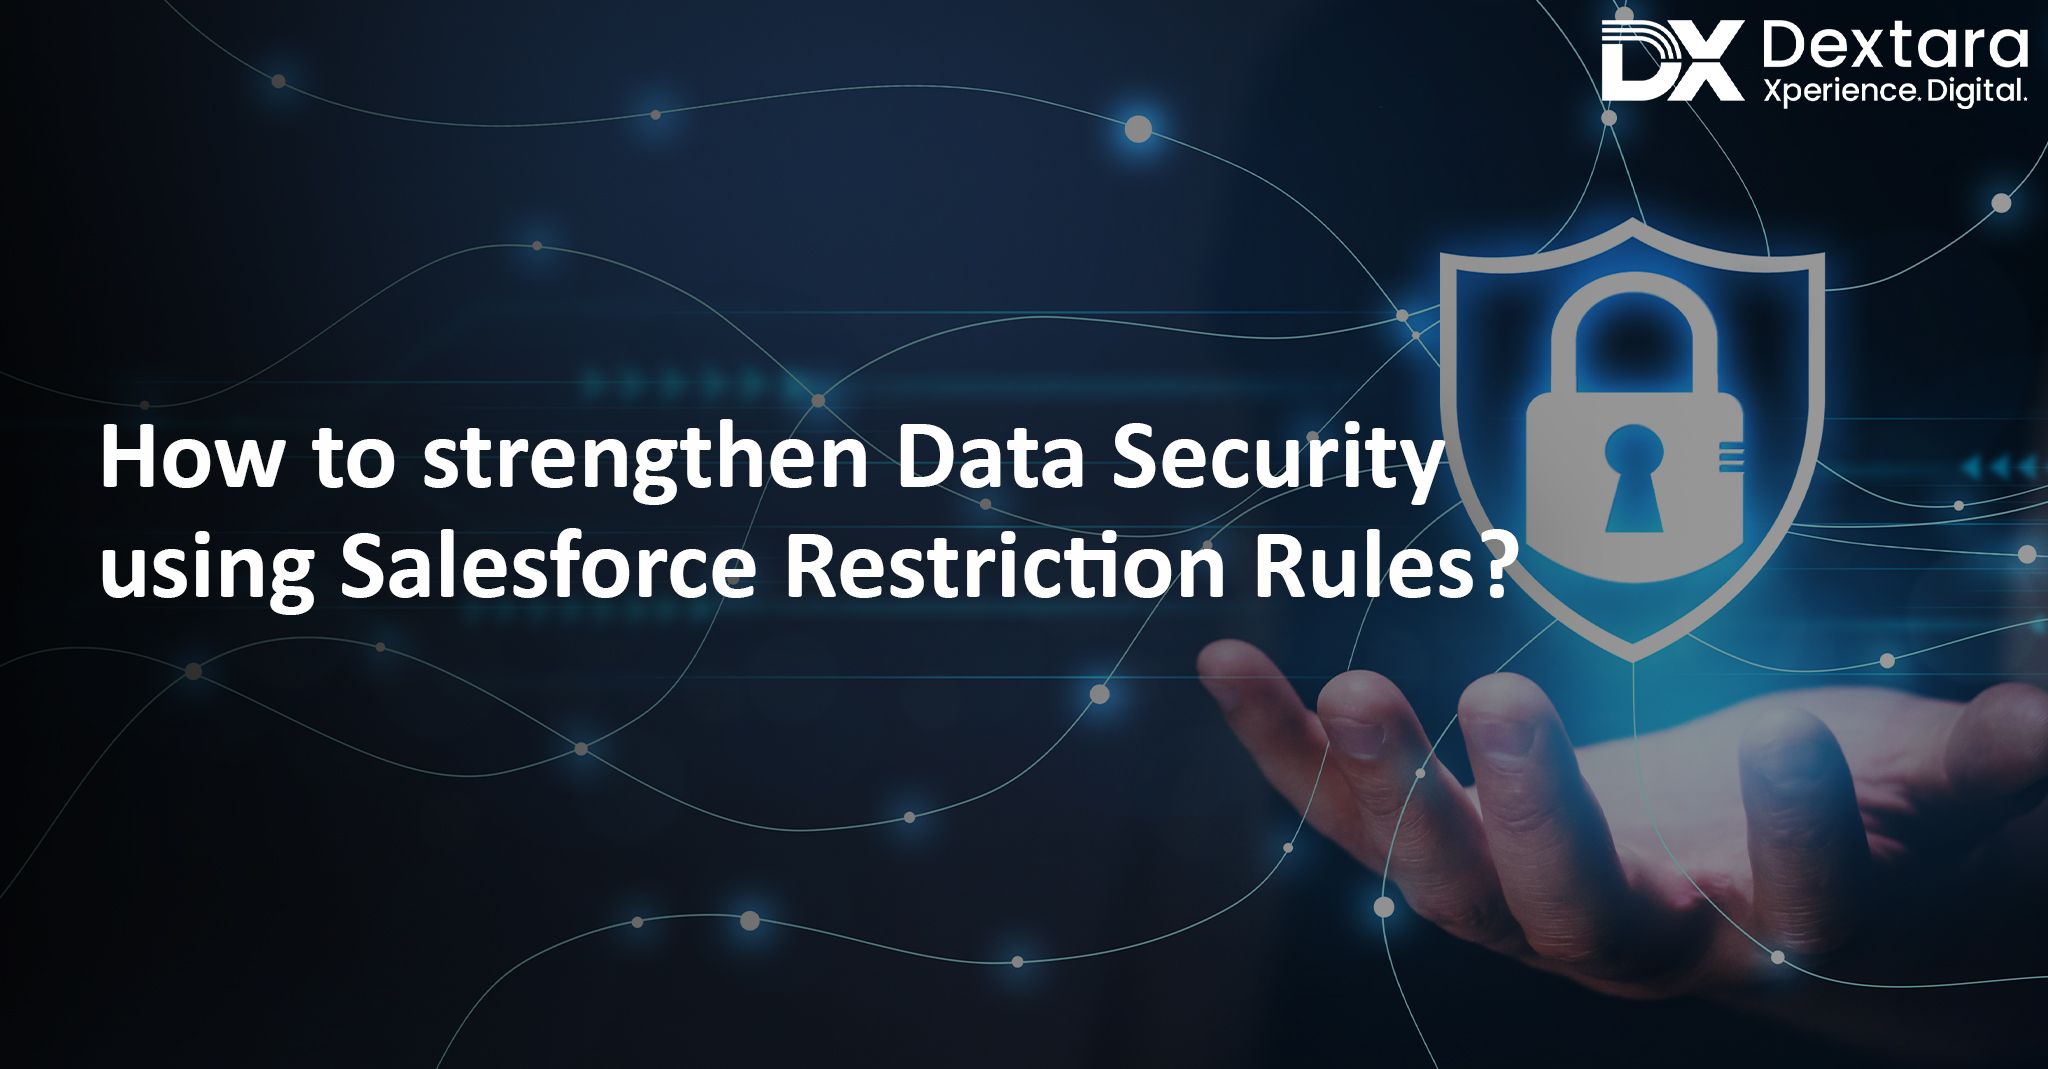 Salesforce Restriction Rules